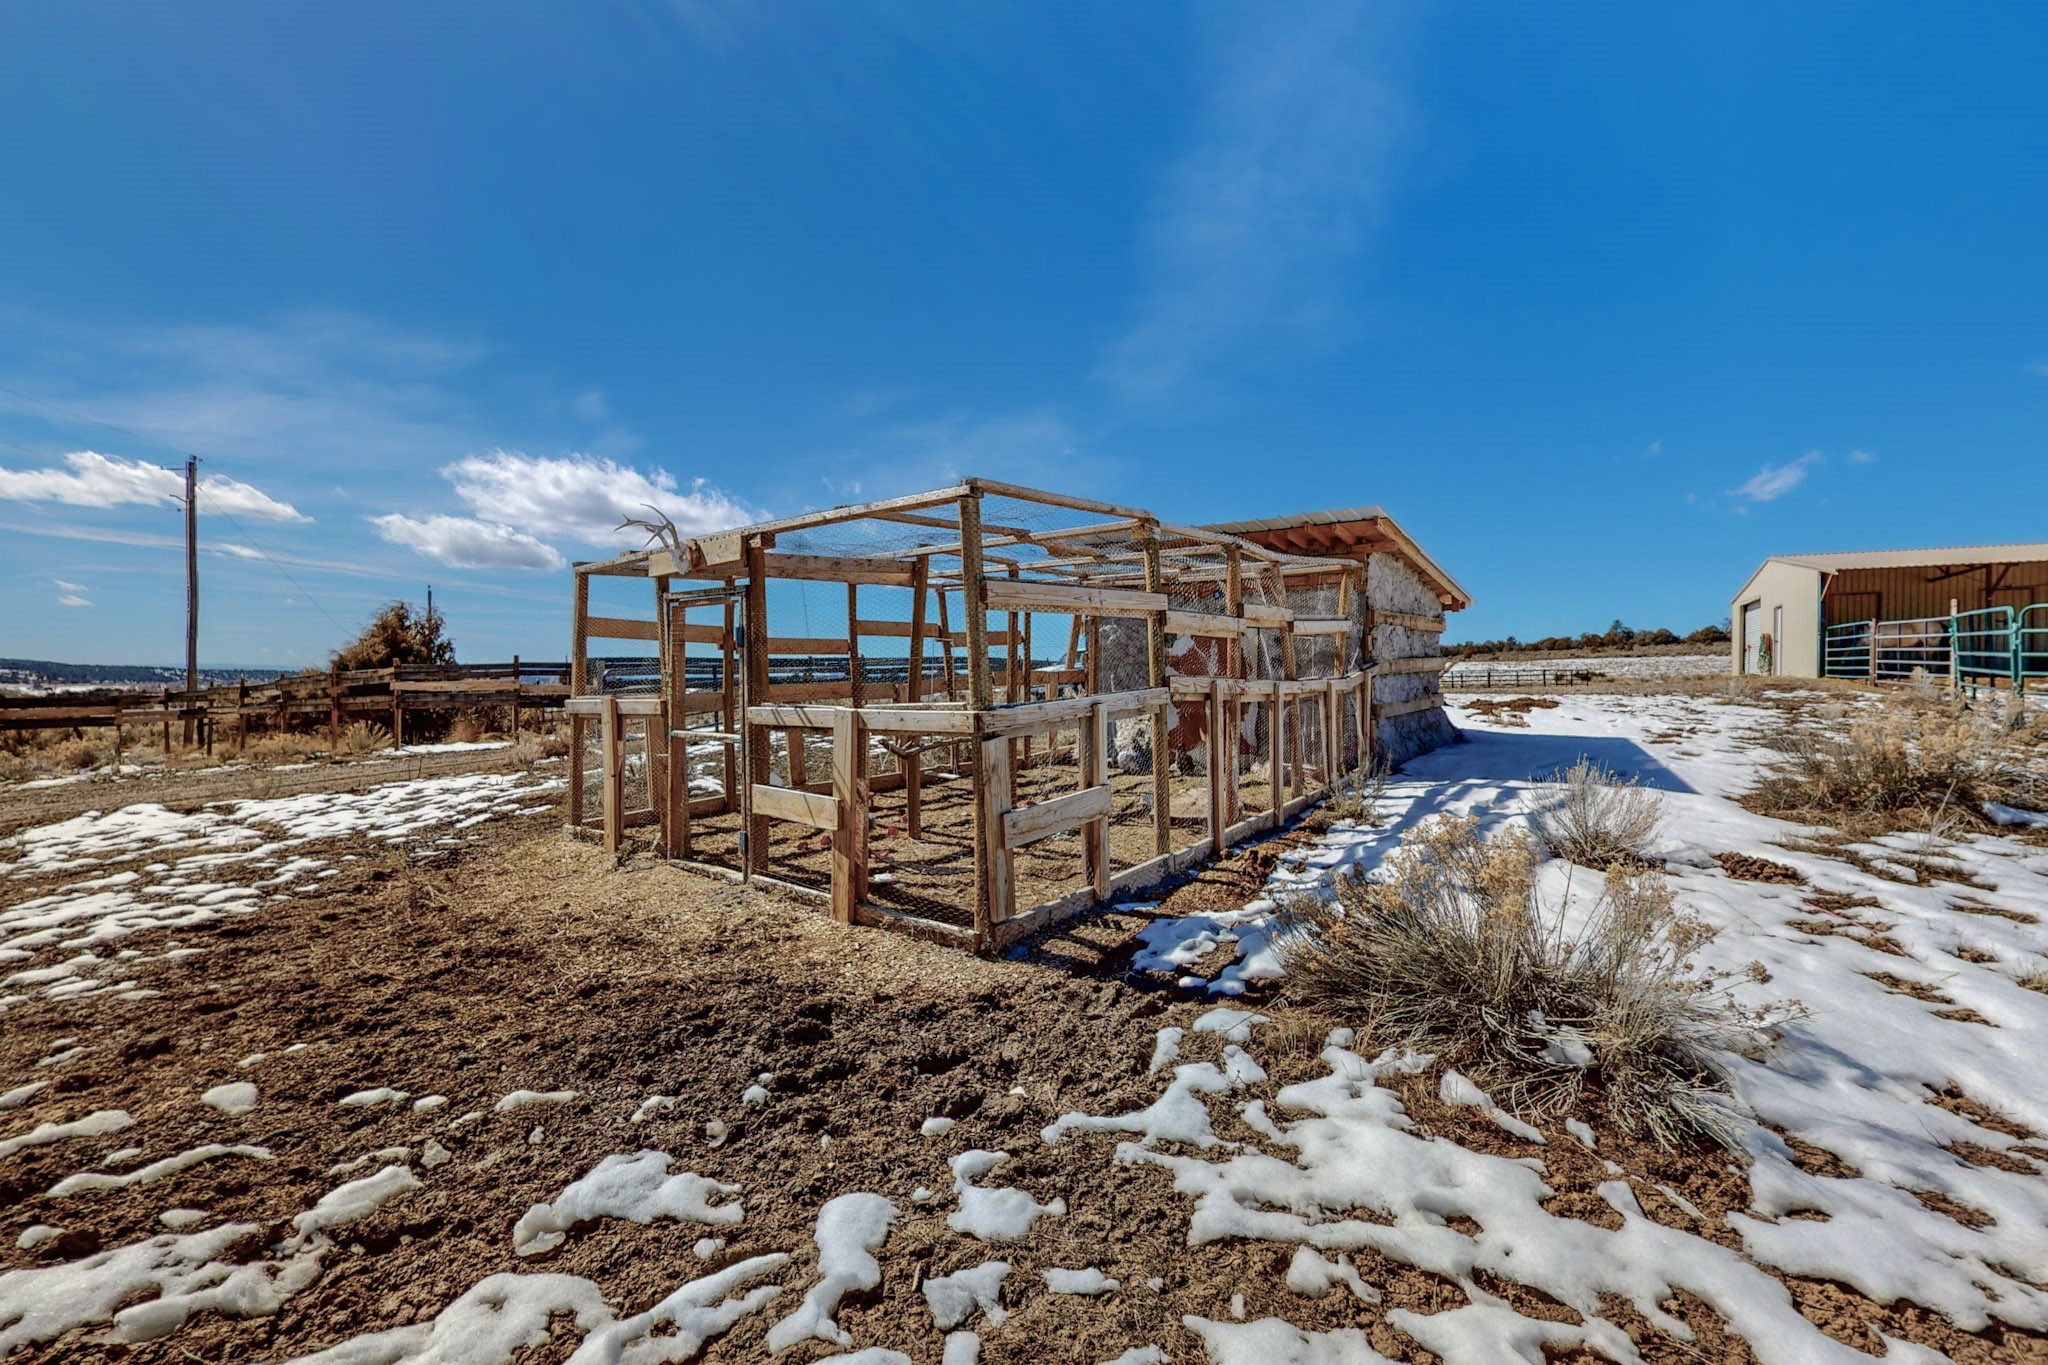 CHICKEN ACCOMMODATIONS
 Just down from the upper pole barn, is a newly installed custom adobe chicken coop. The inside enclosure is 12x14 with a fully closing door,  for heat or cool, as well as a 20X14 foot outside coop enclosure ready to hold up to 25 chickens.